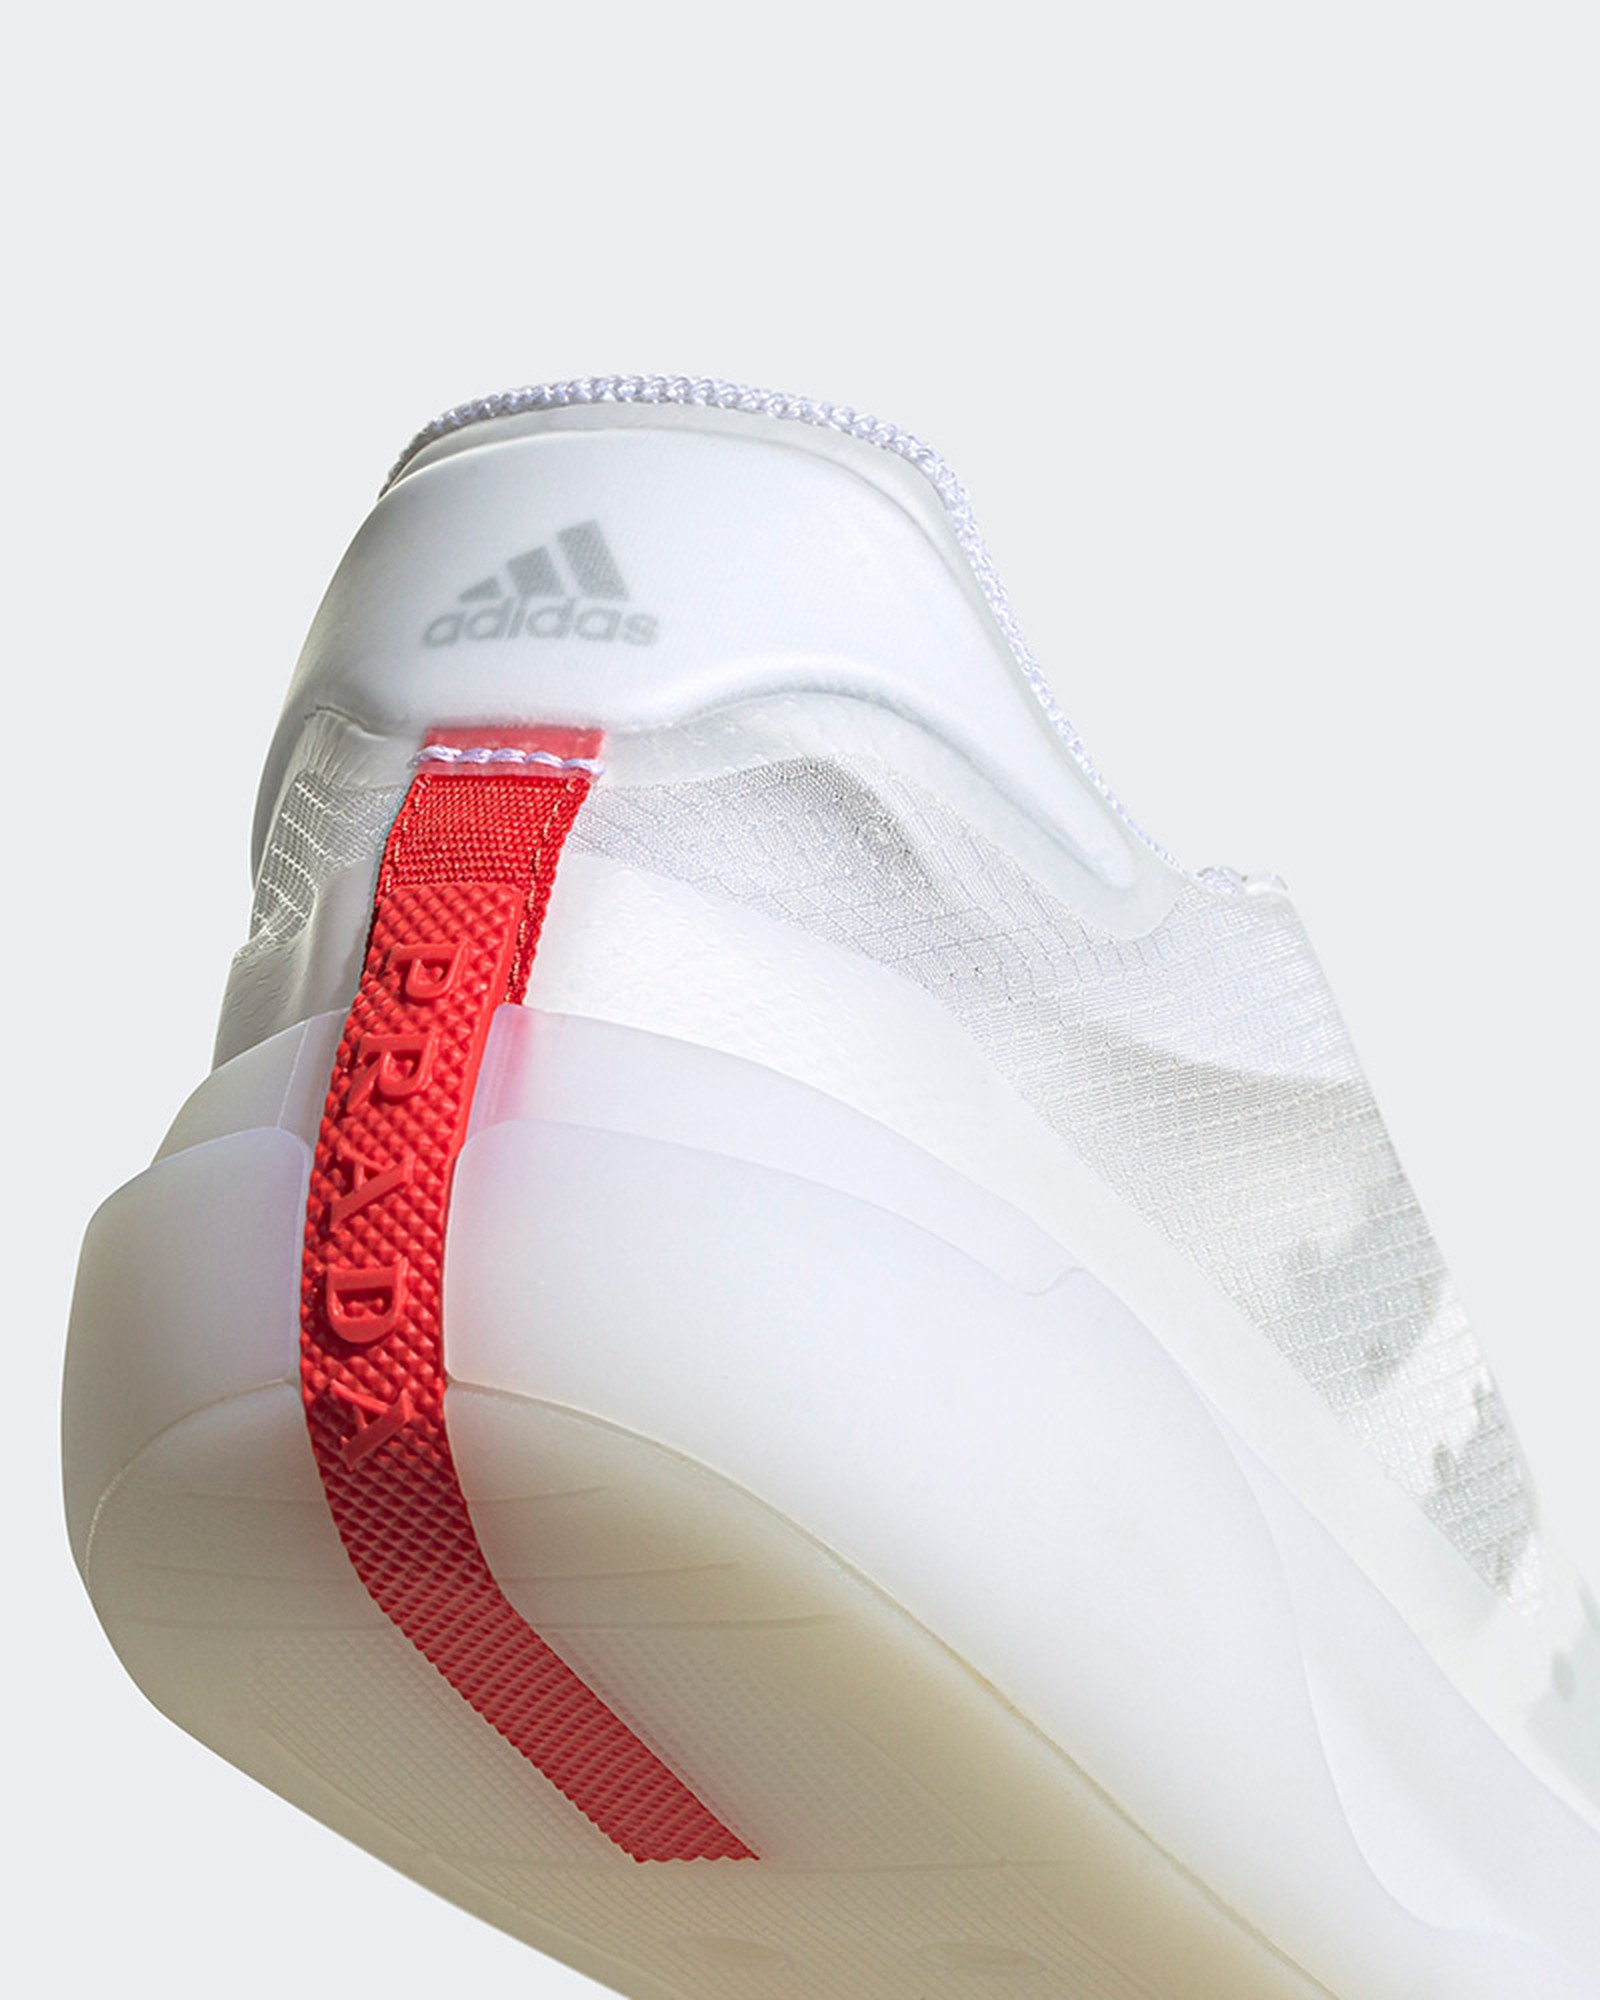 Fashionbi on Twitter: "Luxury @Prada sports brand @adidas have come together to launch the A+P Luna Rossa 21 sneaker, that will be worn by the Rossa Prada Pirelli team @